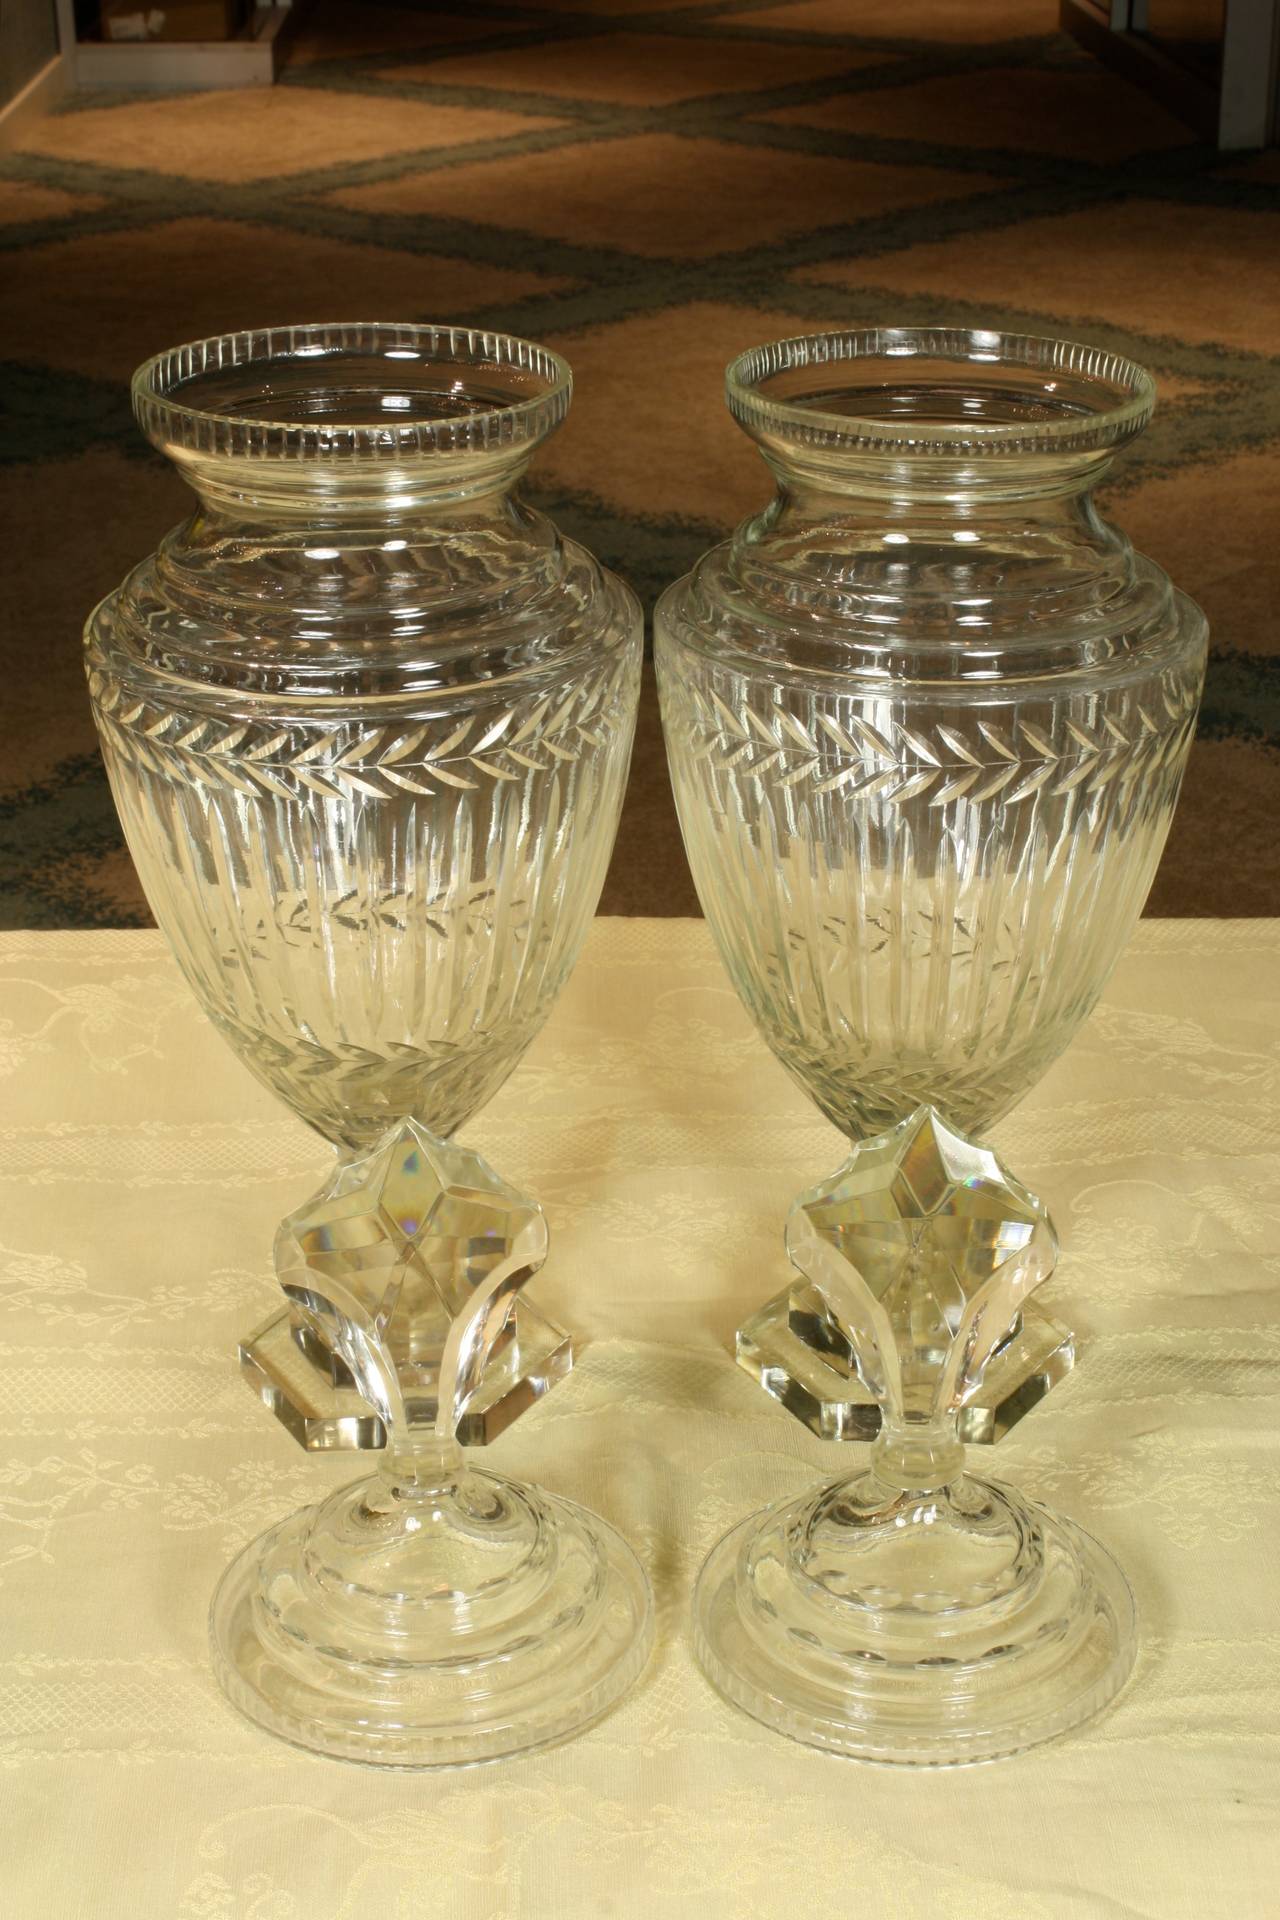 Neoclassical Pair of English Cut-Glass Covered Urns